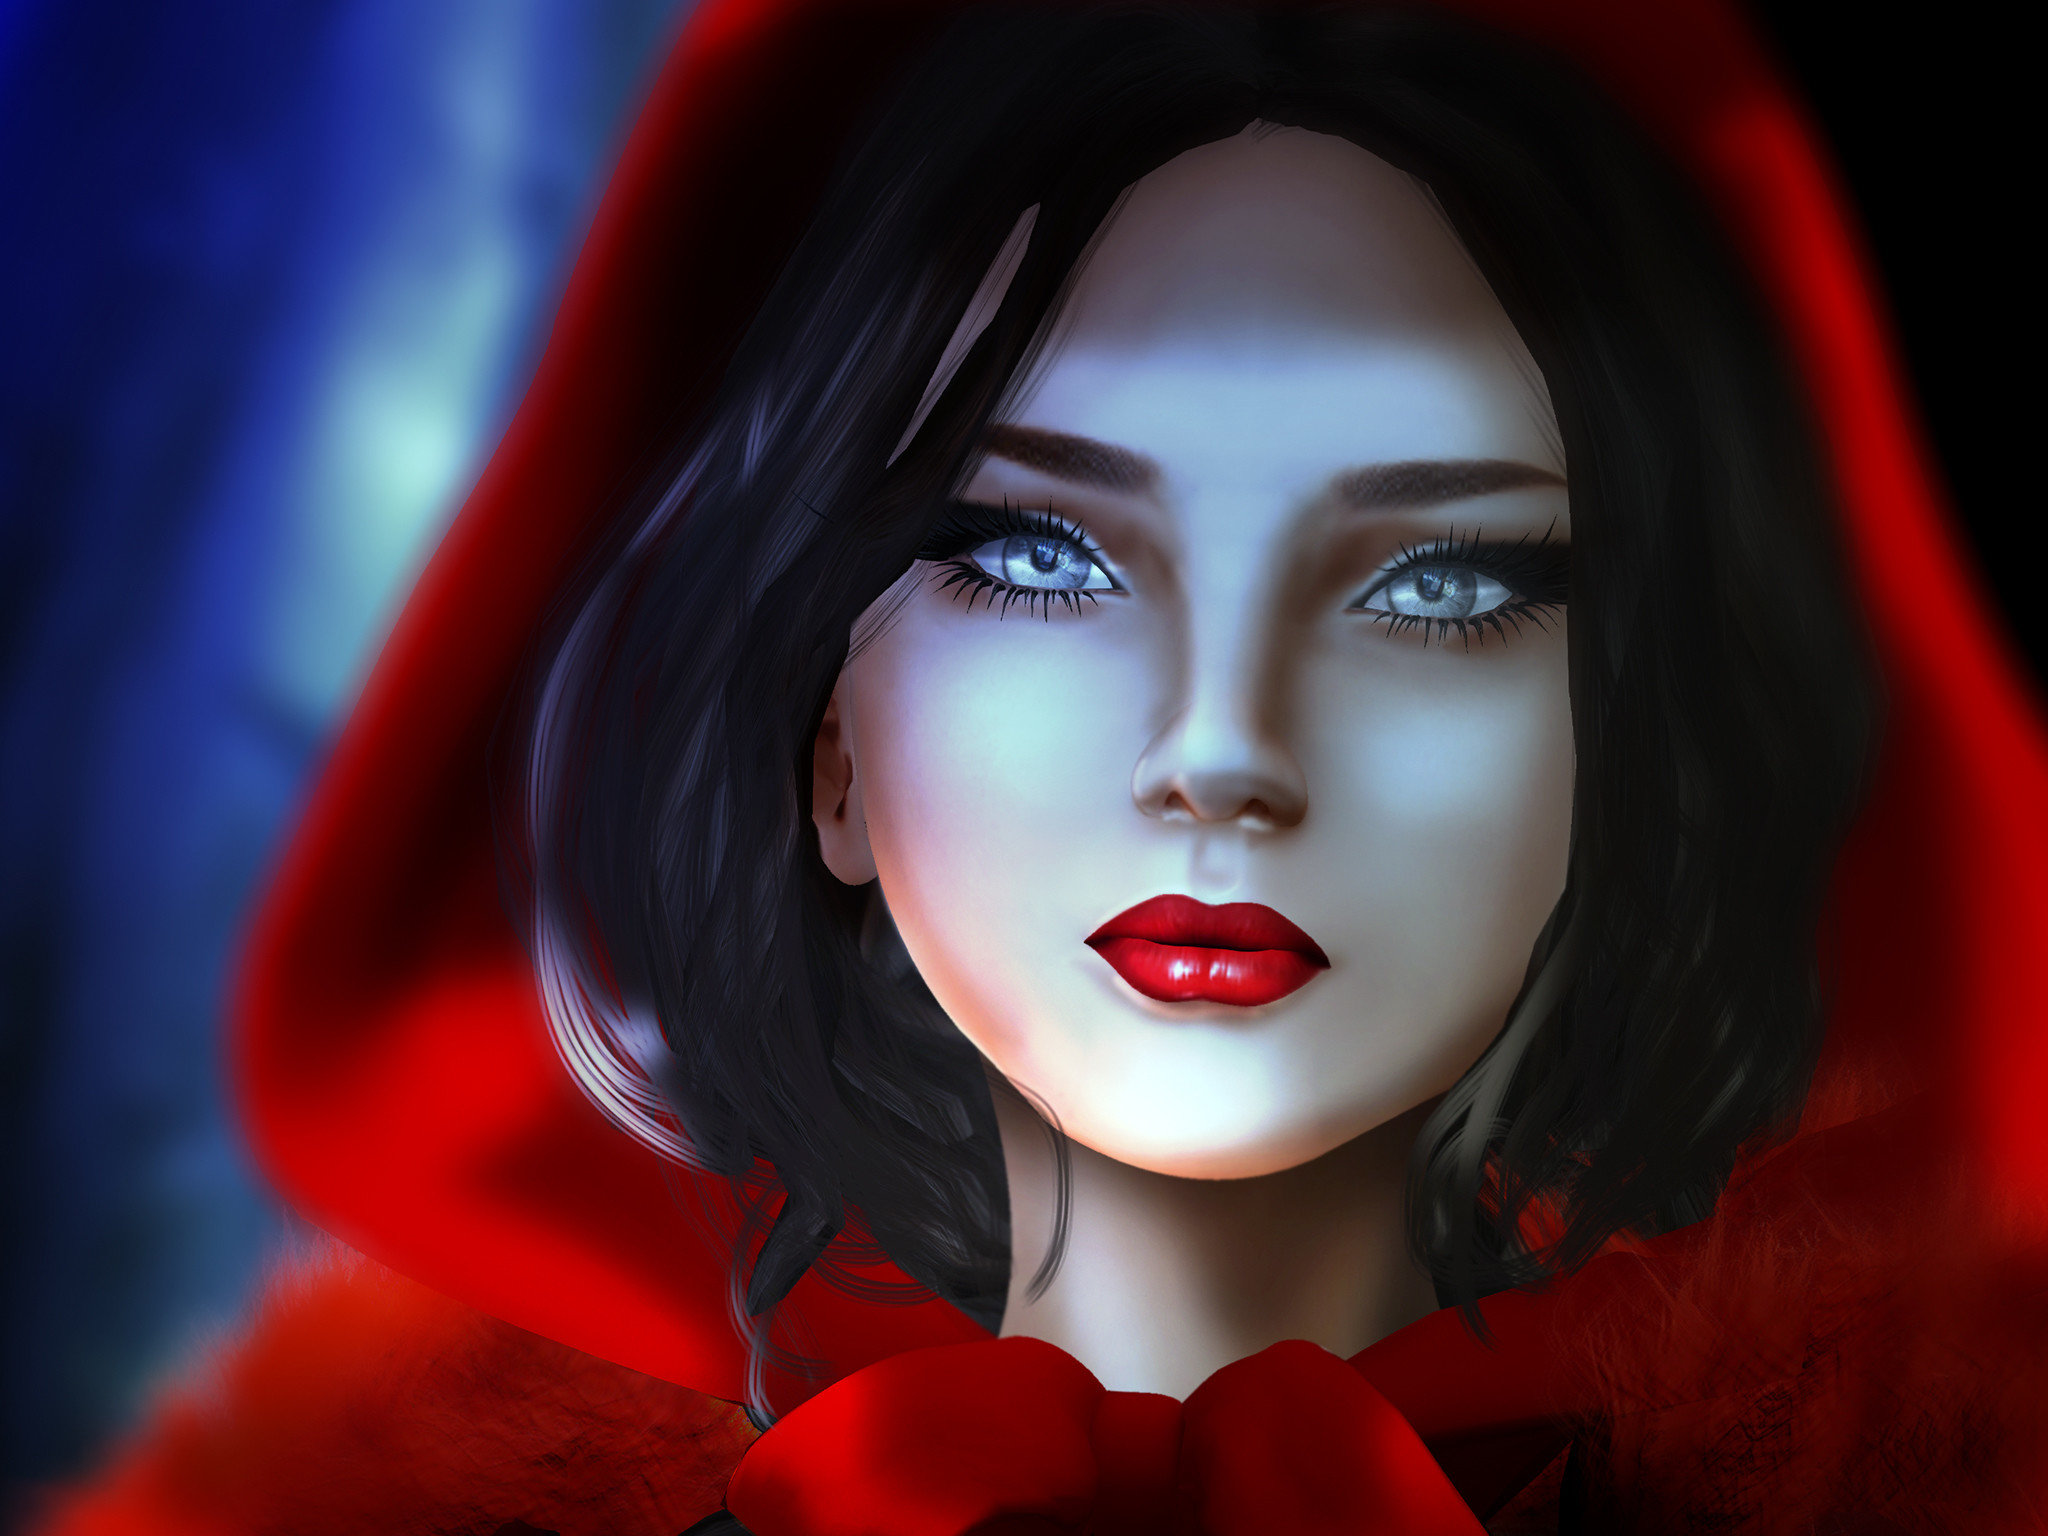 Awesome Red Riding Hood Movie Free Wallpaper Id - Fantacy Wolf And Woman - HD Wallpaper 